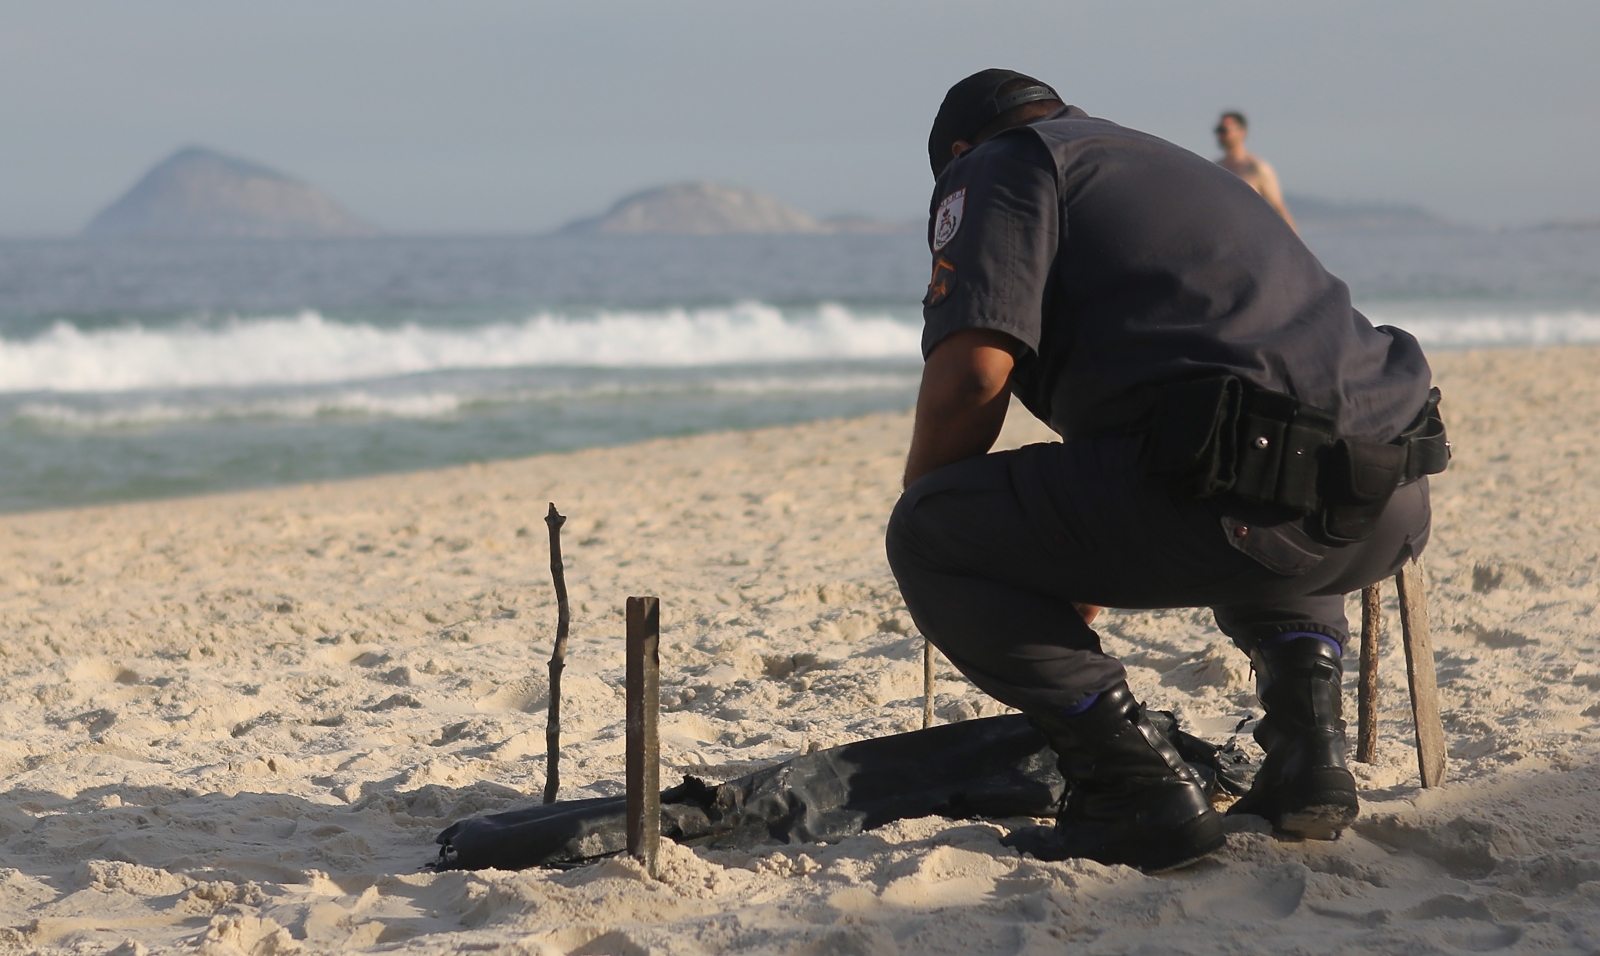 Mutilated body parts found on Rio shore next to beach volleyball site1600 x 956